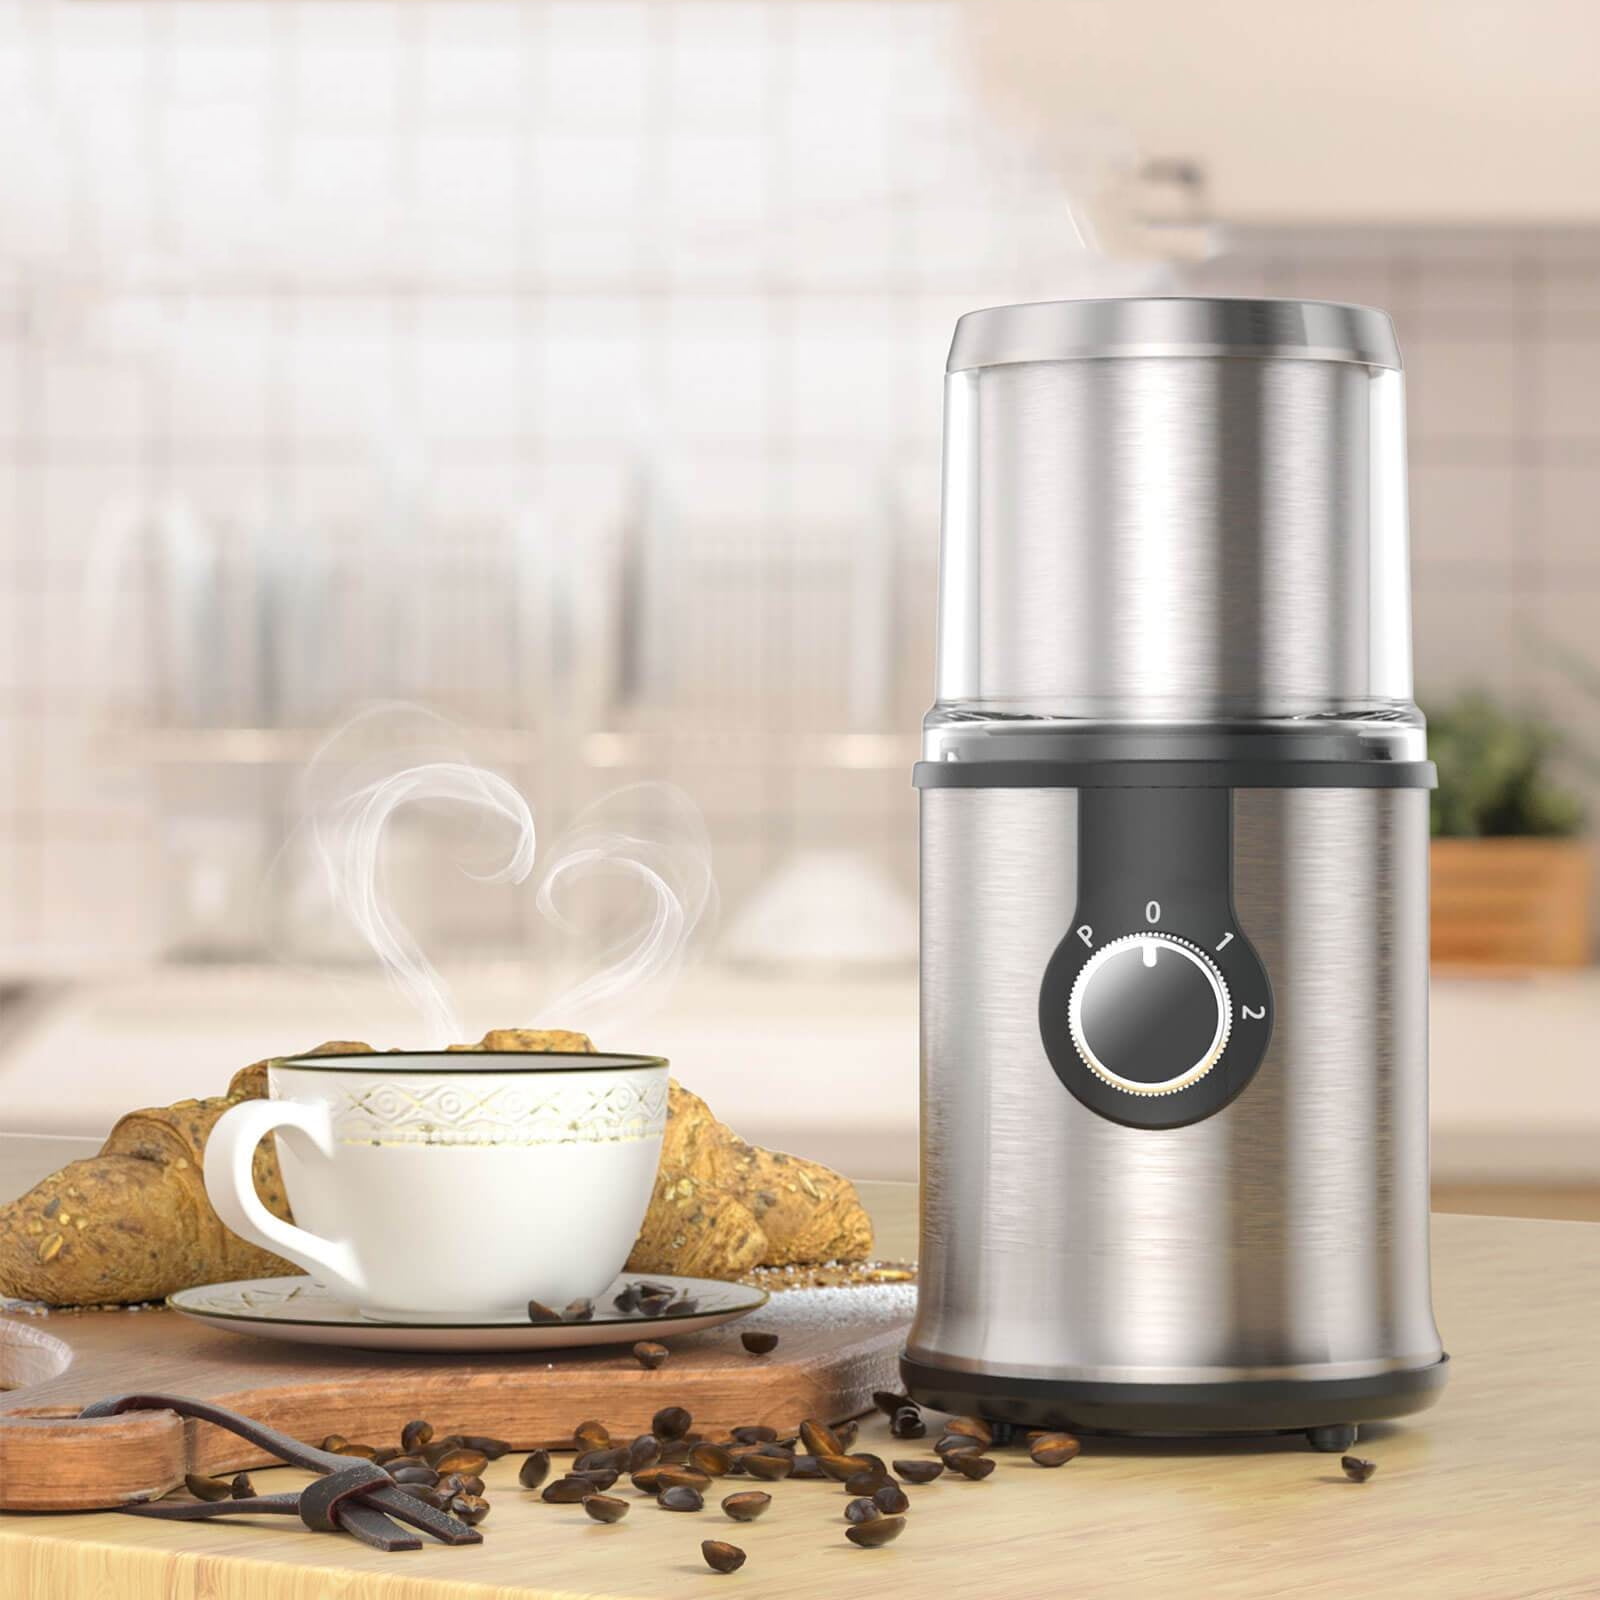 Dropship 1pc Automatic Grinder; Detachable Washable Design Garlic Herbal  Grain Spice Grinder; Electric Coffee Bean Grinders to Sell Online at a  Lower Price